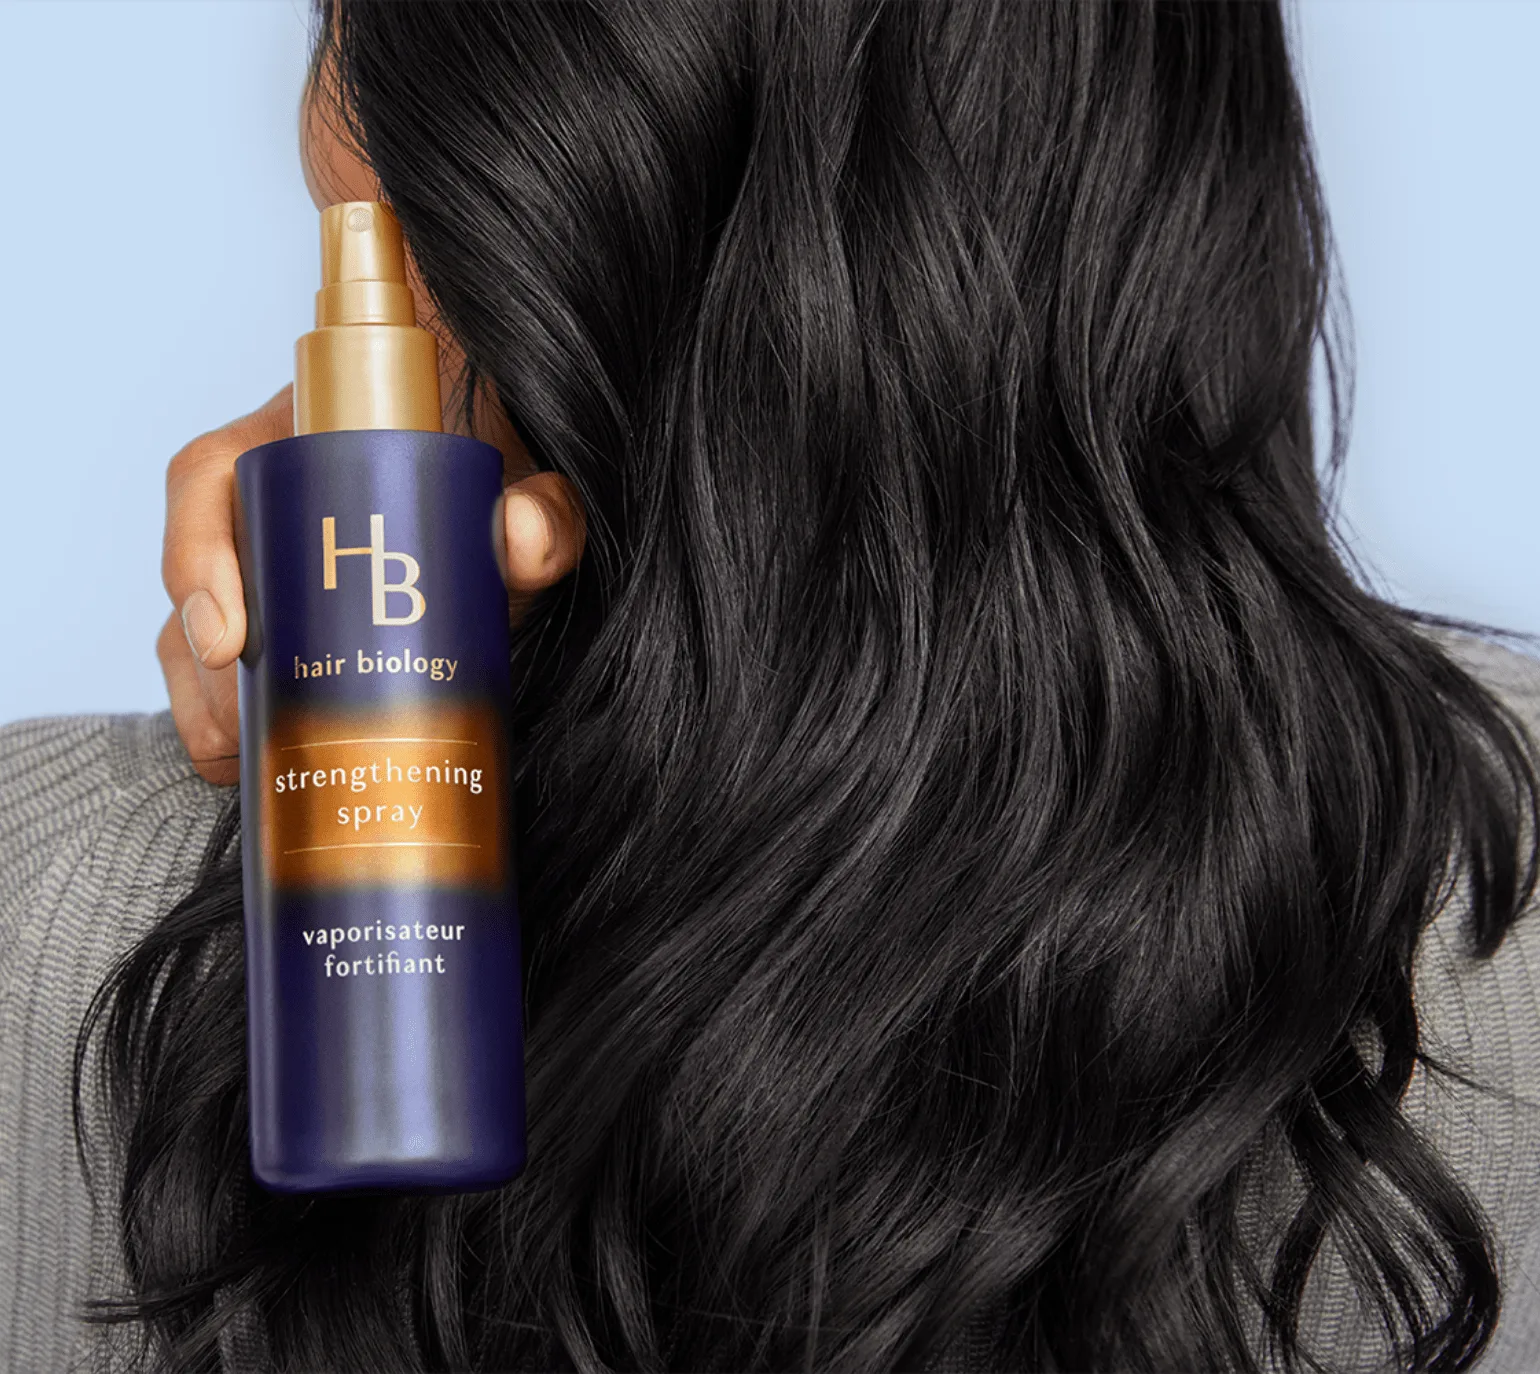 Stronger and longer hair with Strengthening and Revitalizing Treatment Spray